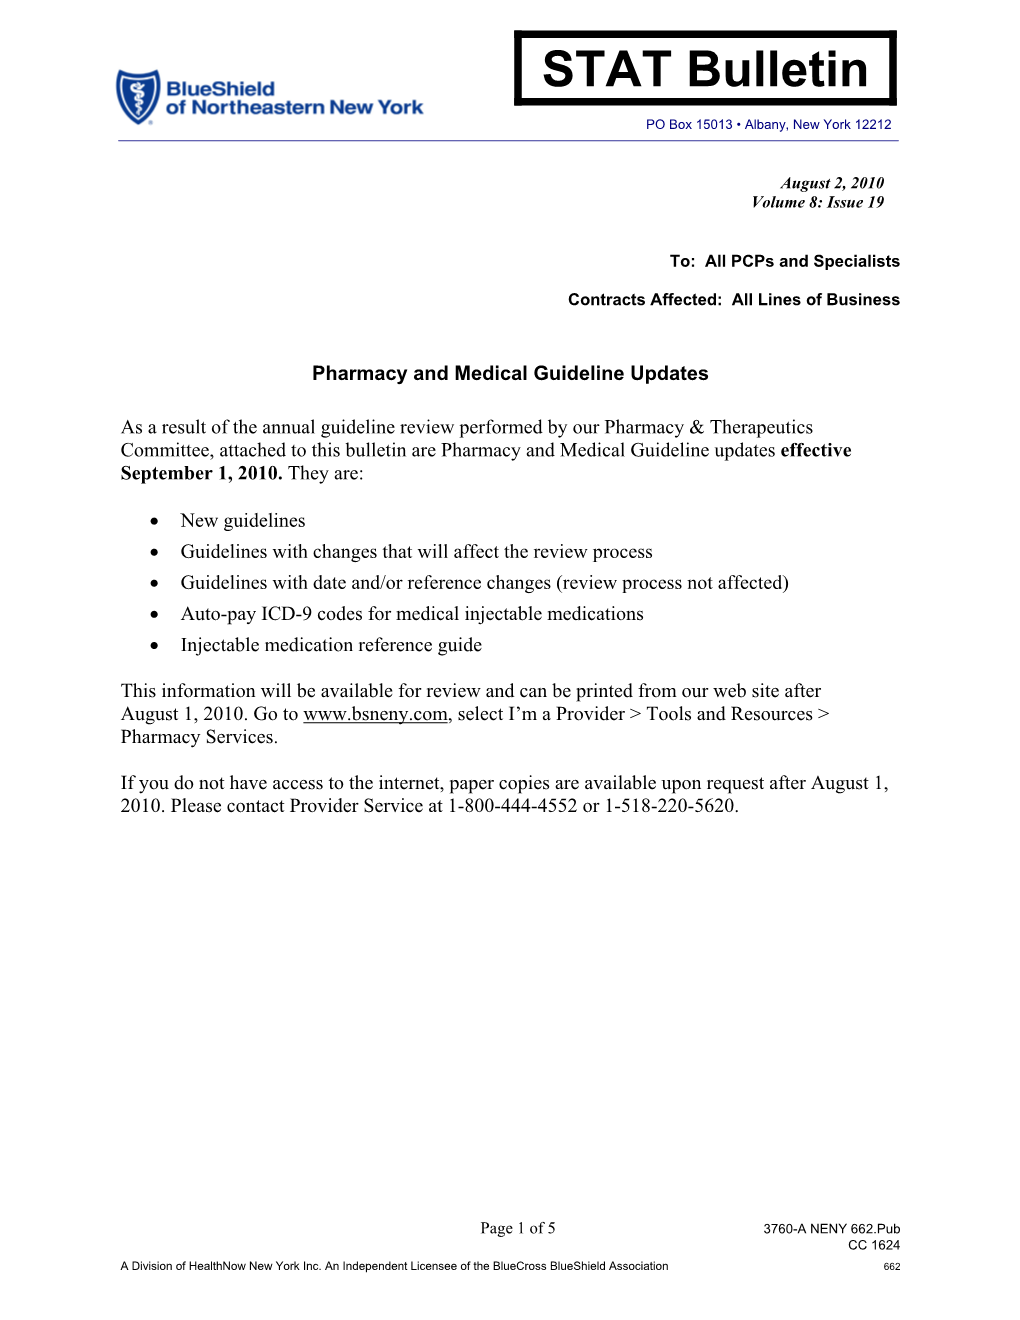 Pharmacy and Medical Guideline Updates